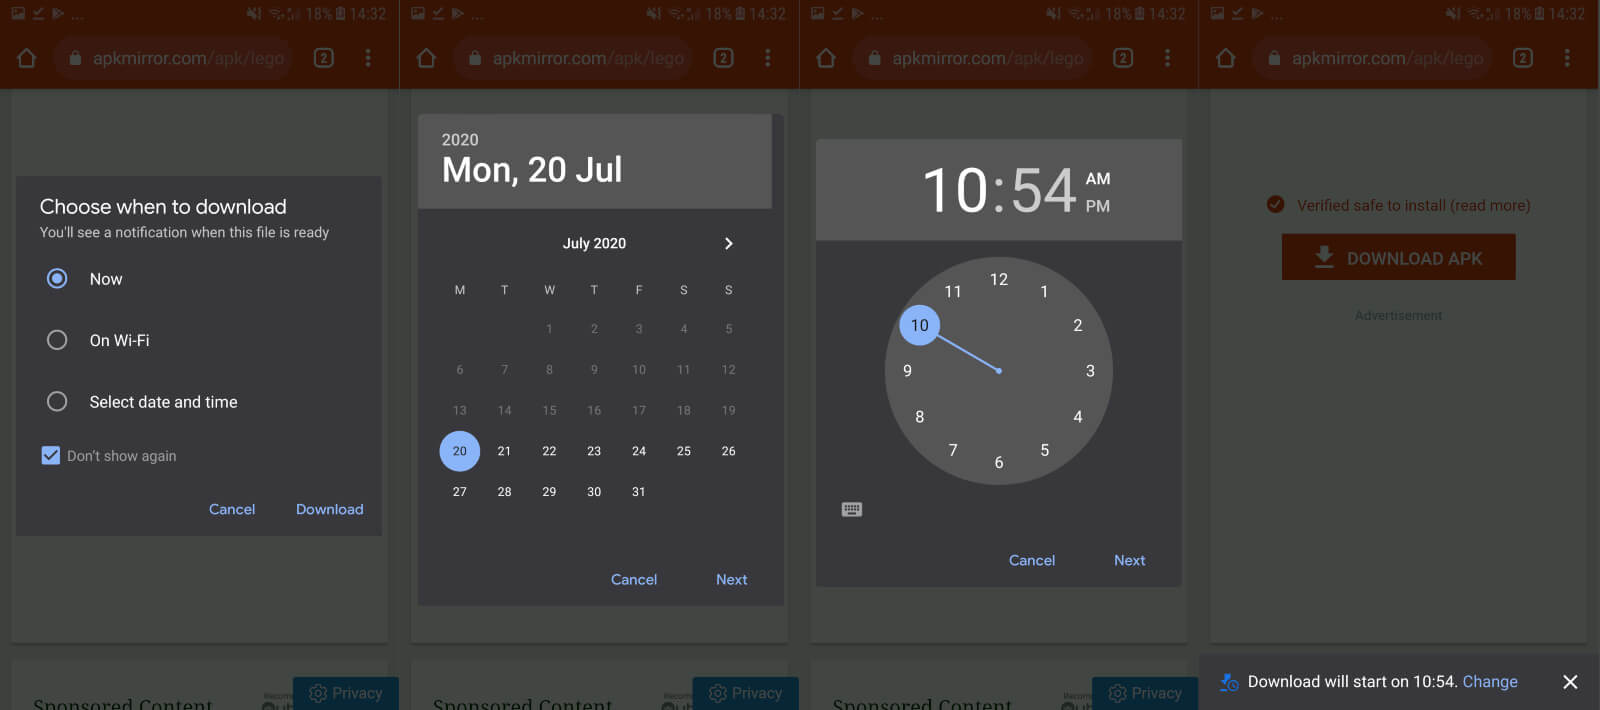 activate and use the download schedule in the Chrome browser for Android